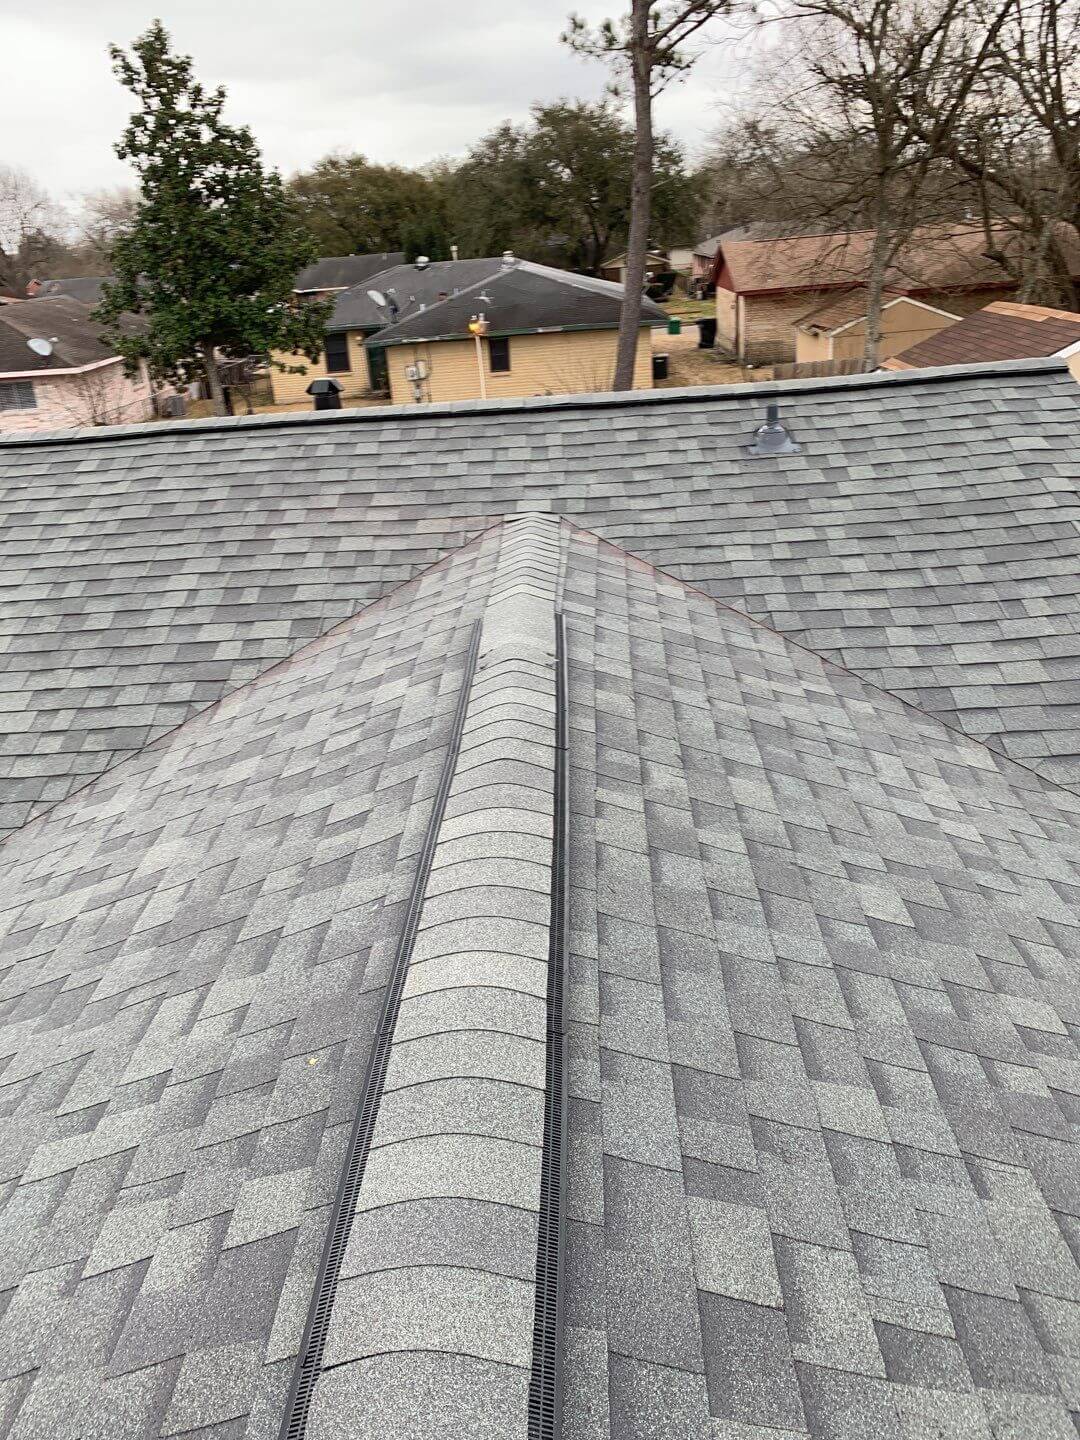 Pros and Cons of Asphalt Shingle Roofing